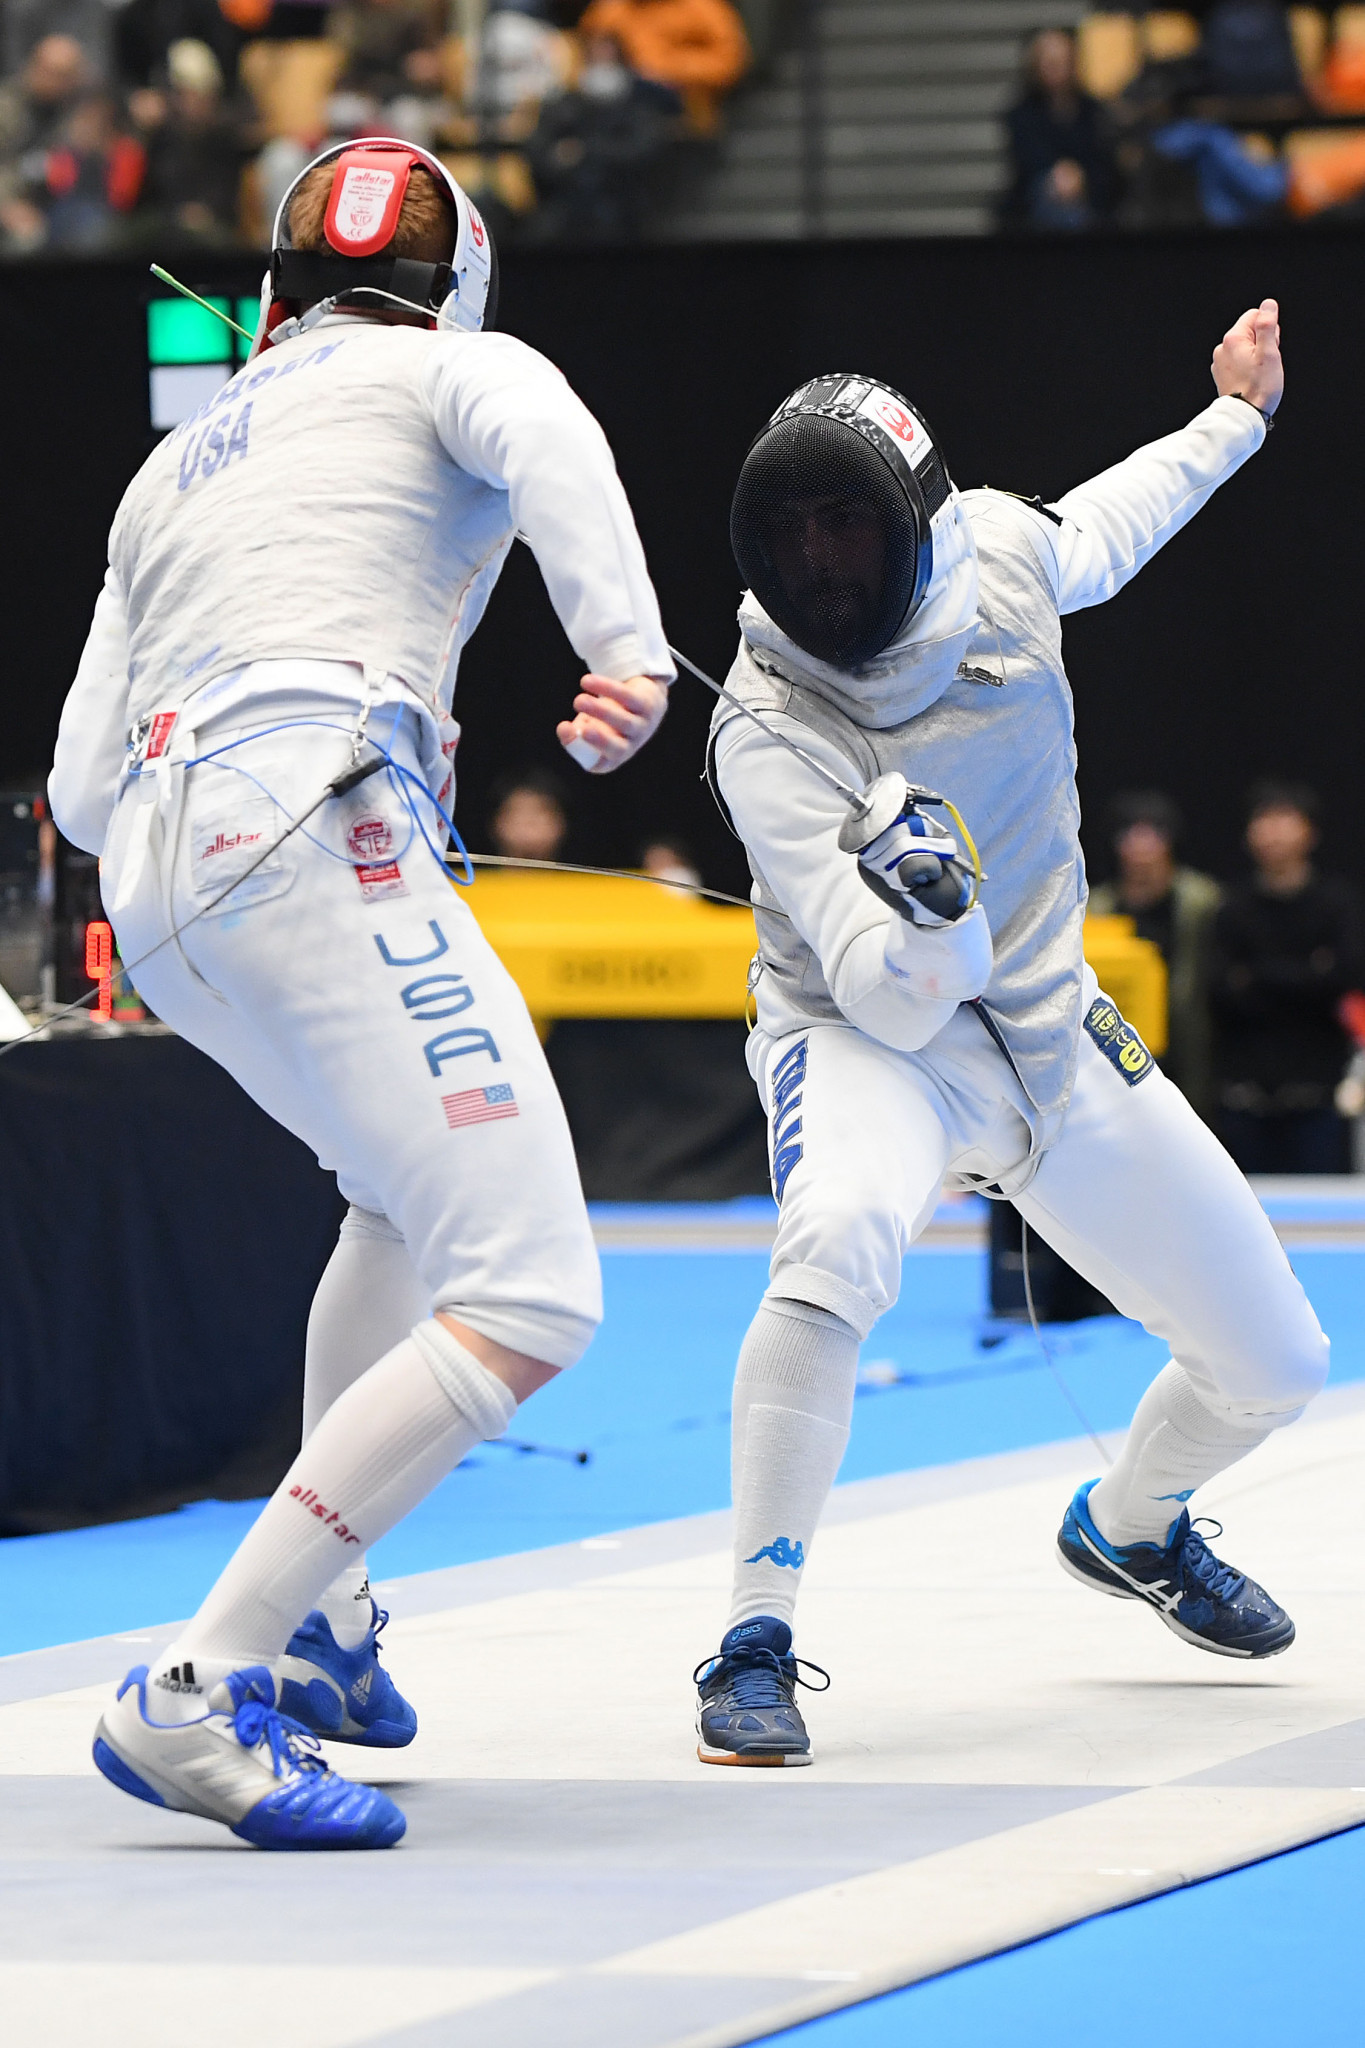 Italy's world champion Alessio Foconi will face qualifier Philip Shin of the United States as he gets into action at the FIE Men's Foil World Cup in Saint Petersburg tomorrow morning ©Getty Images